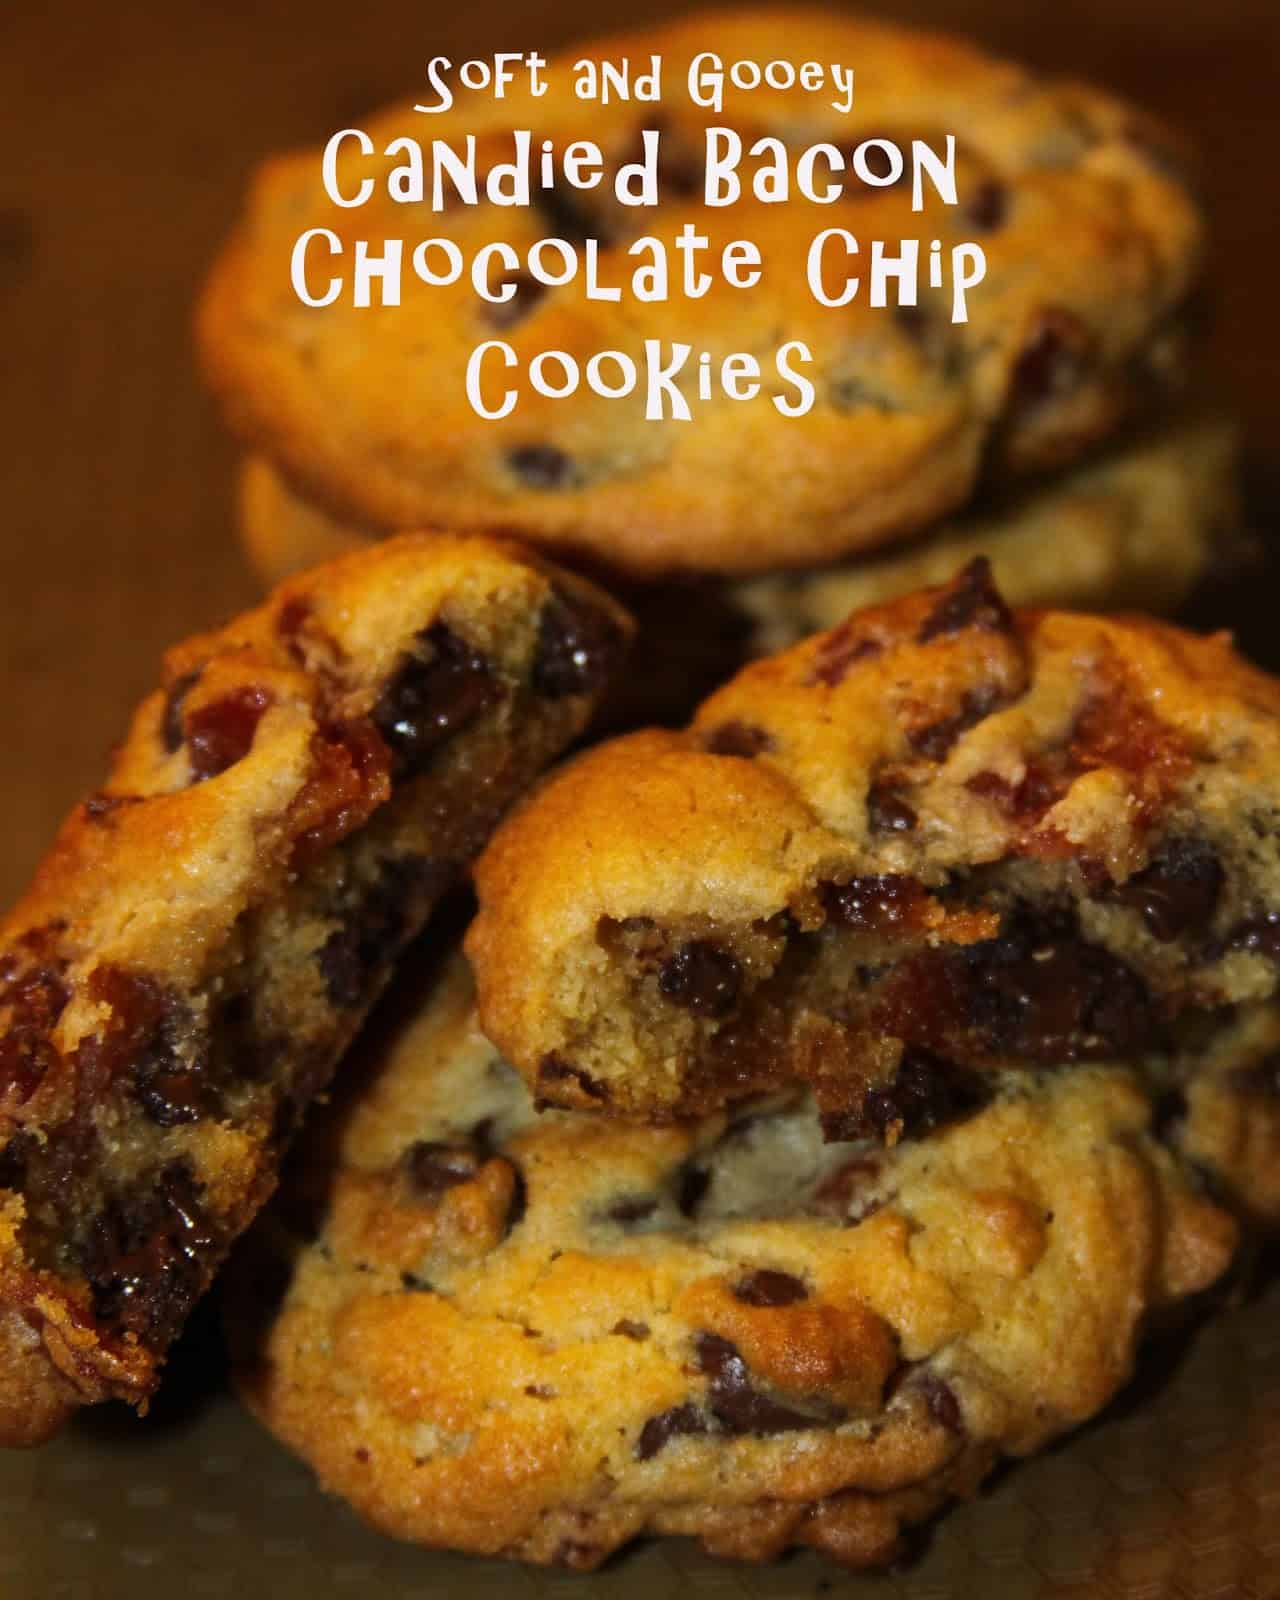 Candied bacon chocolate chip cookies